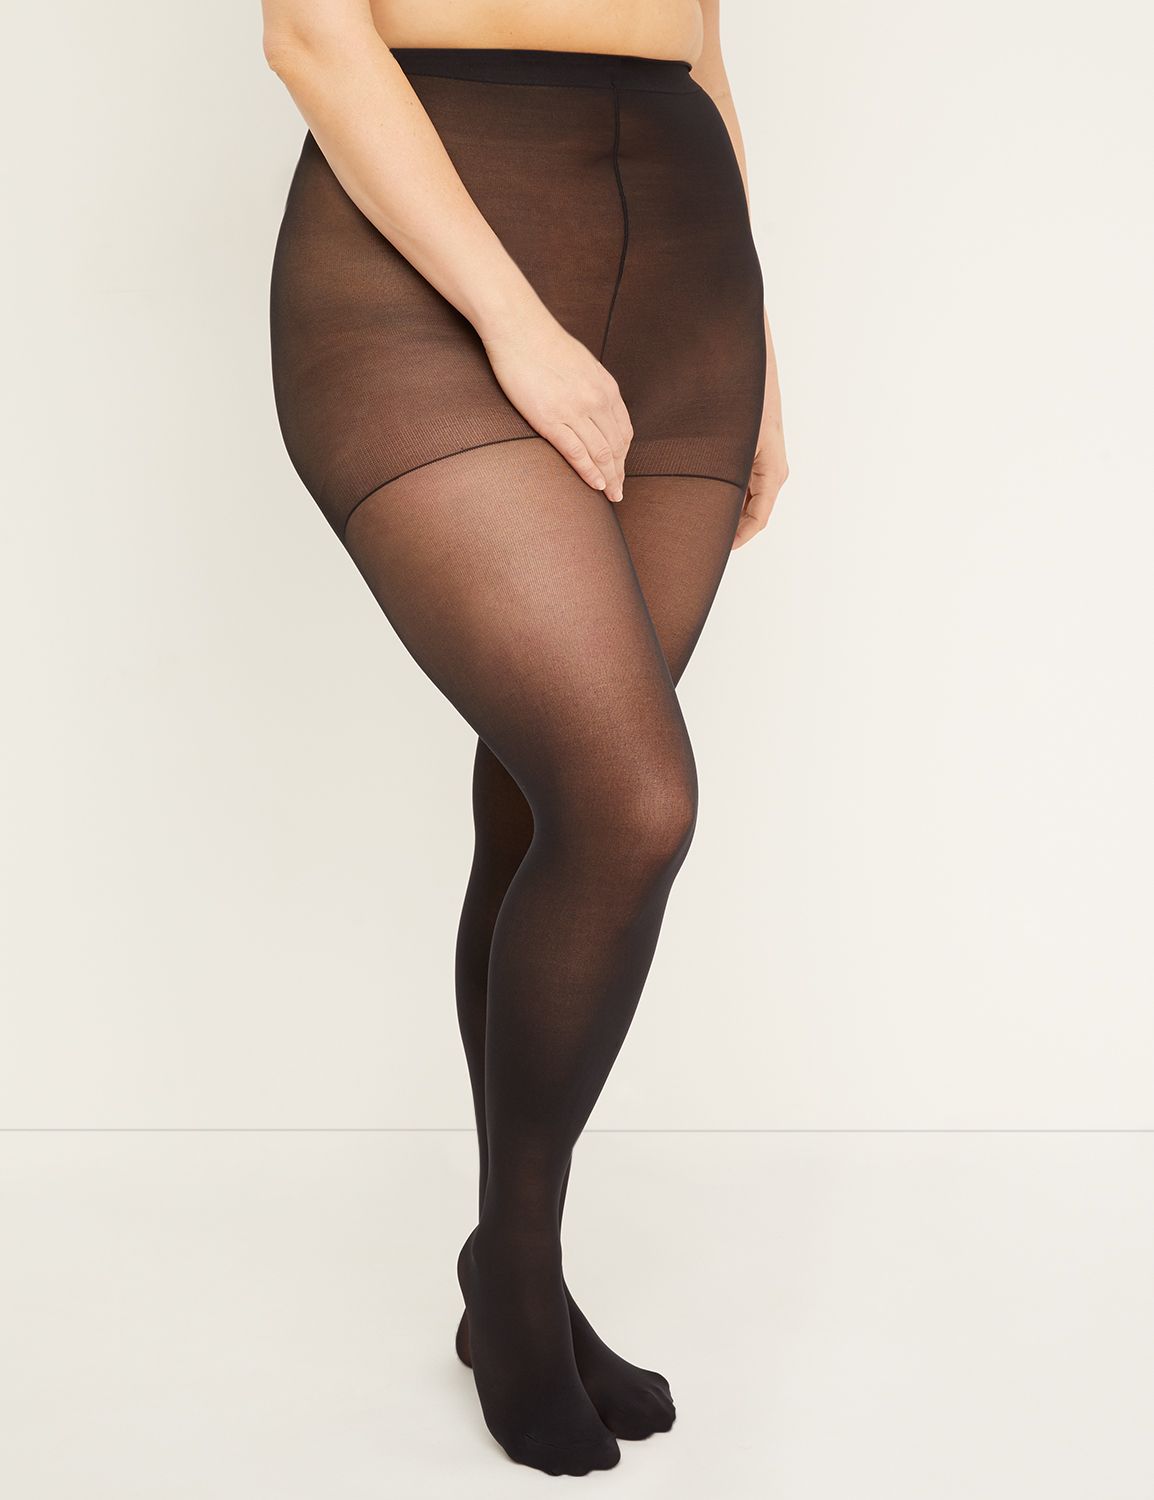 Plus Size Tights pantyhose opaque sheer Tummy Control Stretch Stocking